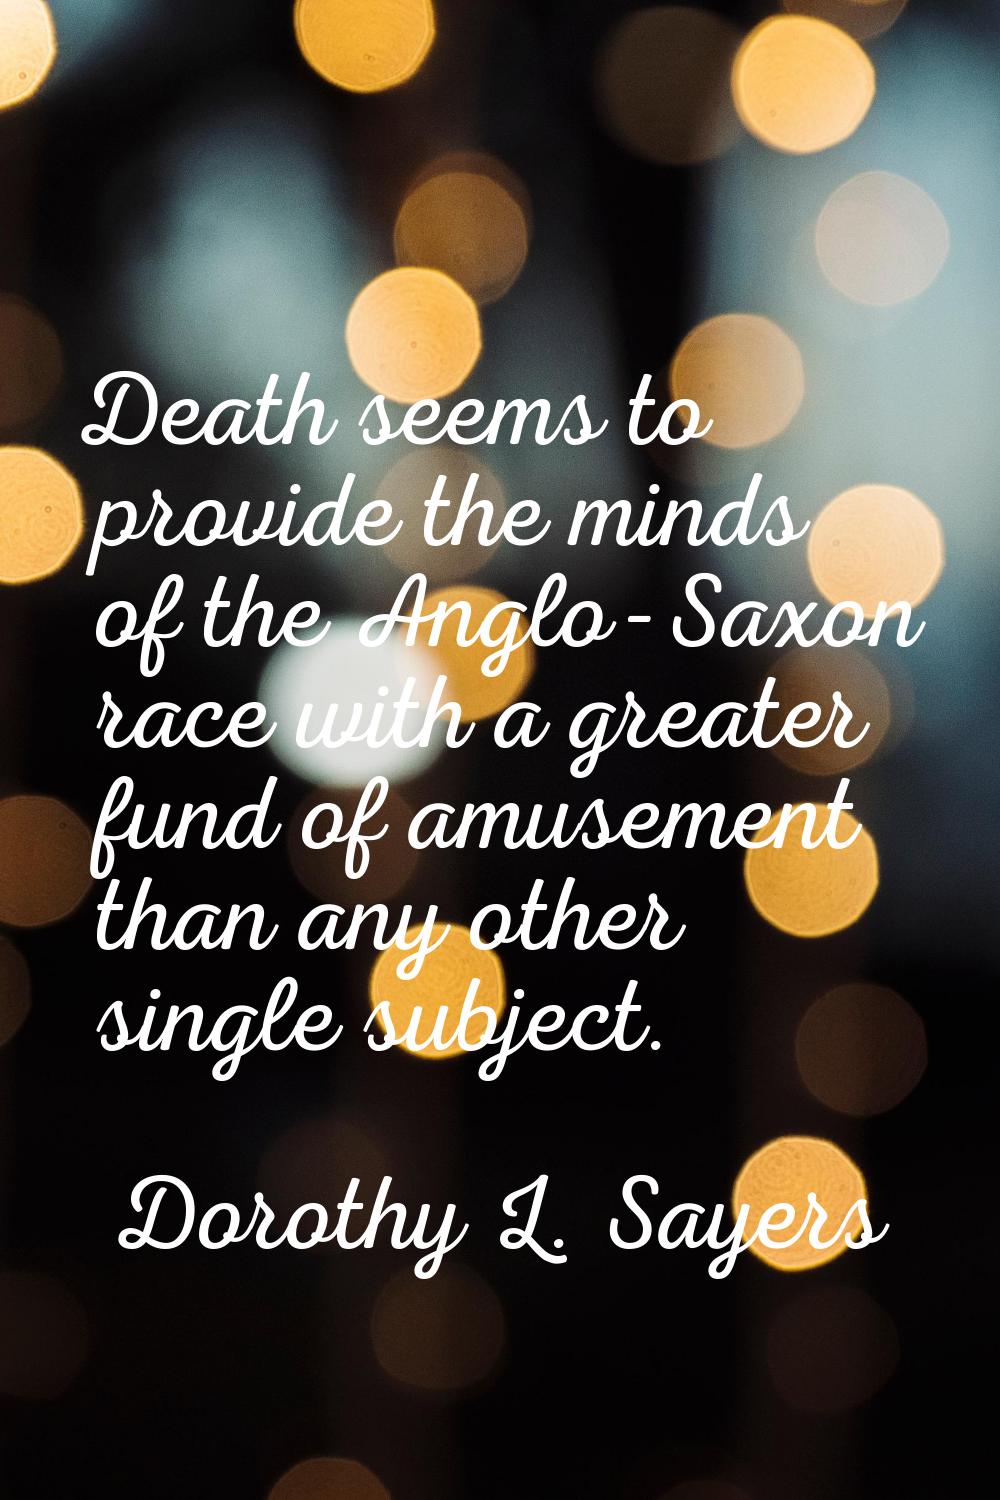 Death seems to provide the minds of the Anglo-Saxon race with a greater fund of amusement than any 